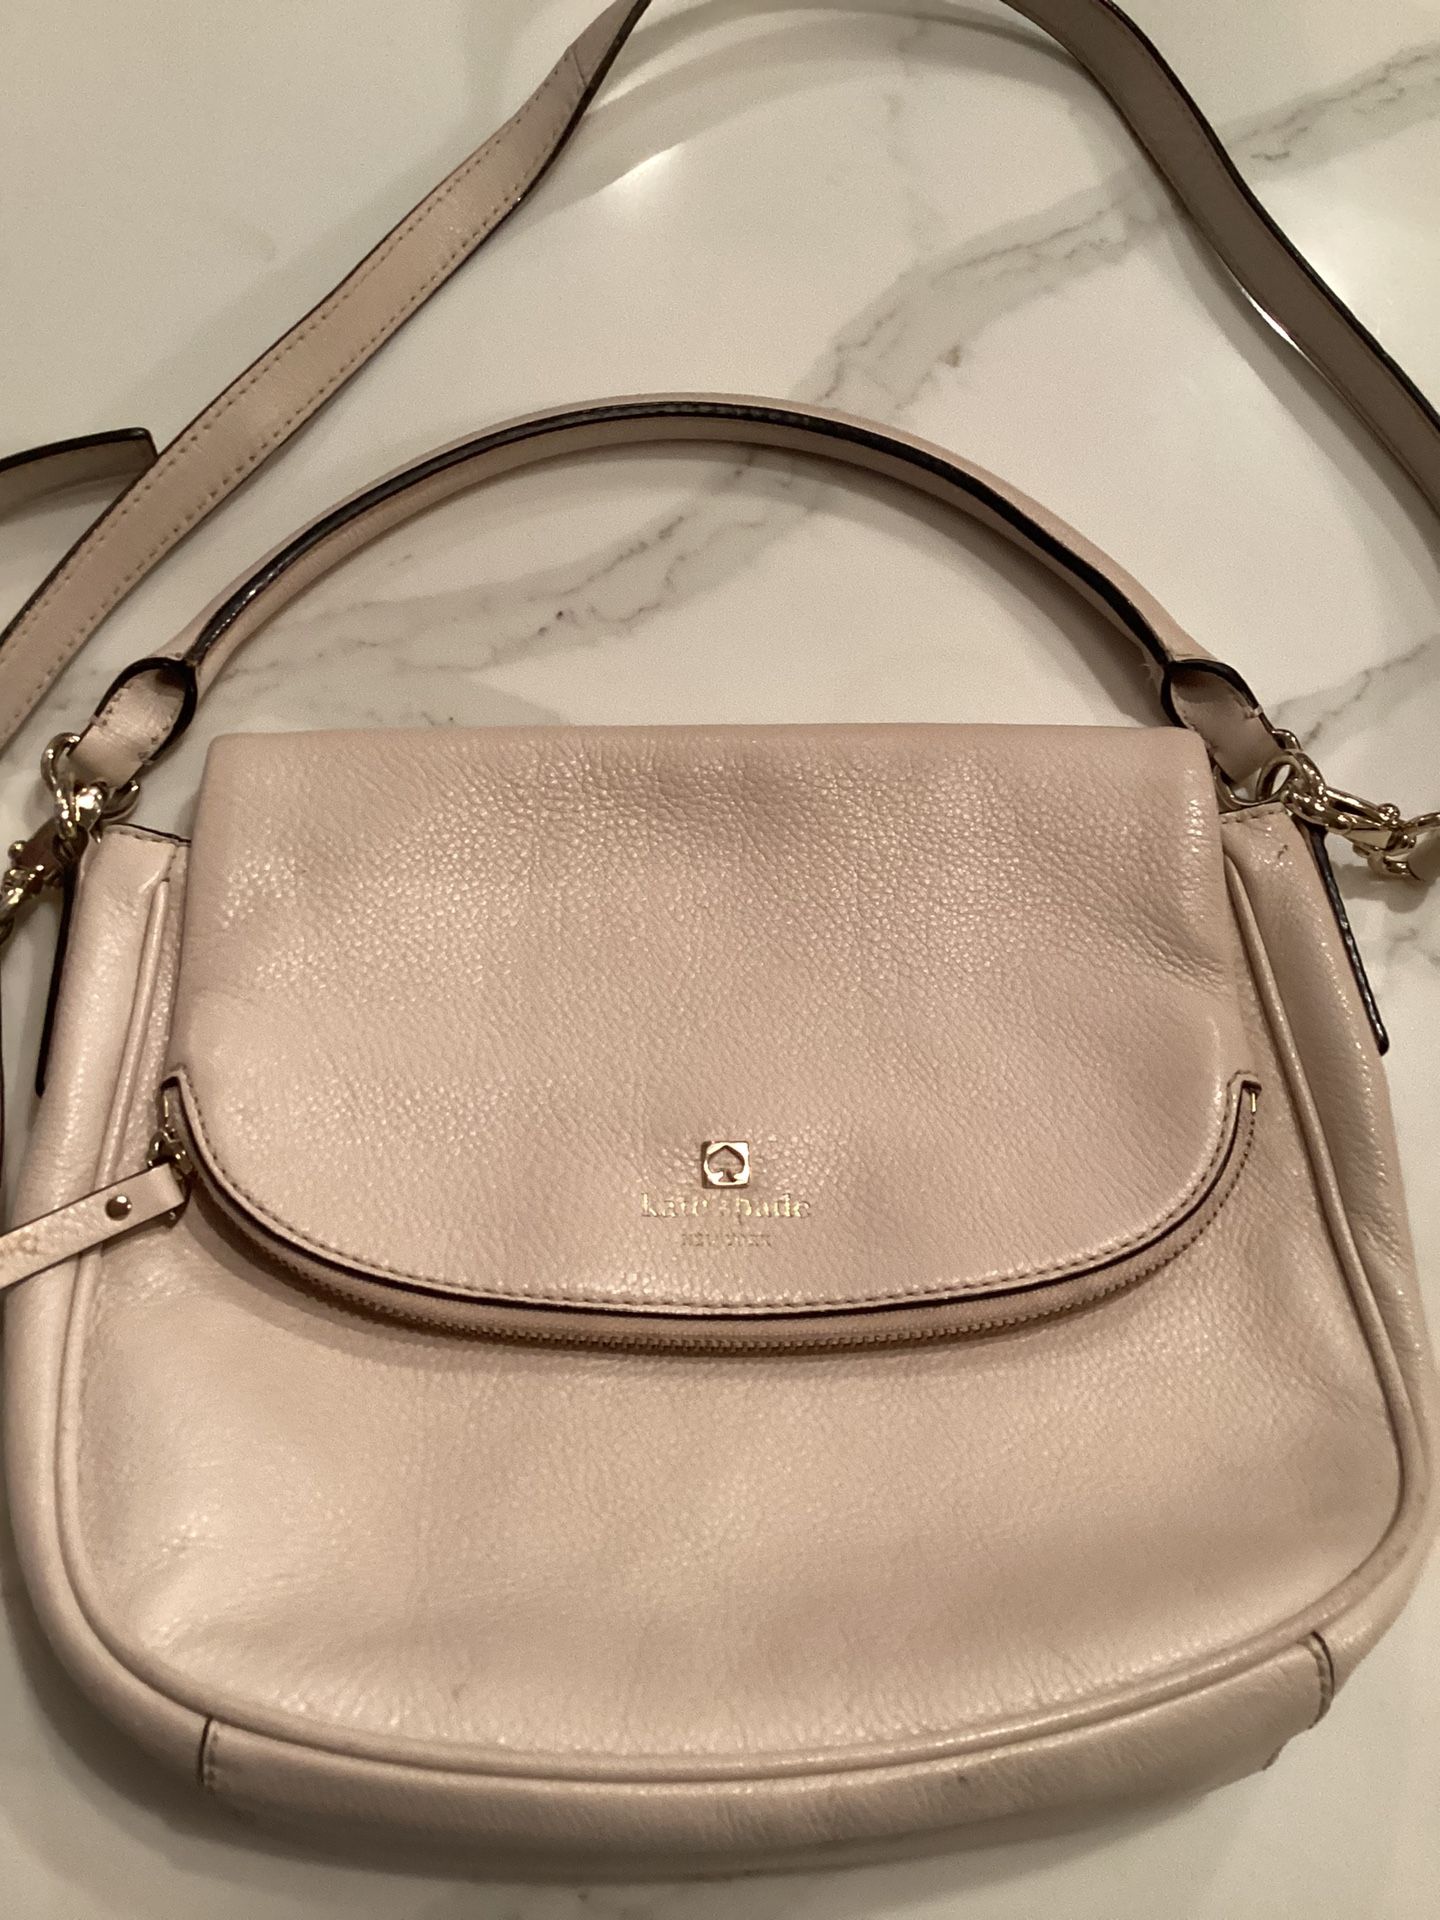 Kate Spade Very Lt Pink authentic leather fold-over crossbody purse -excellent clean condition - 9”T, 12W four pouches, two zippers